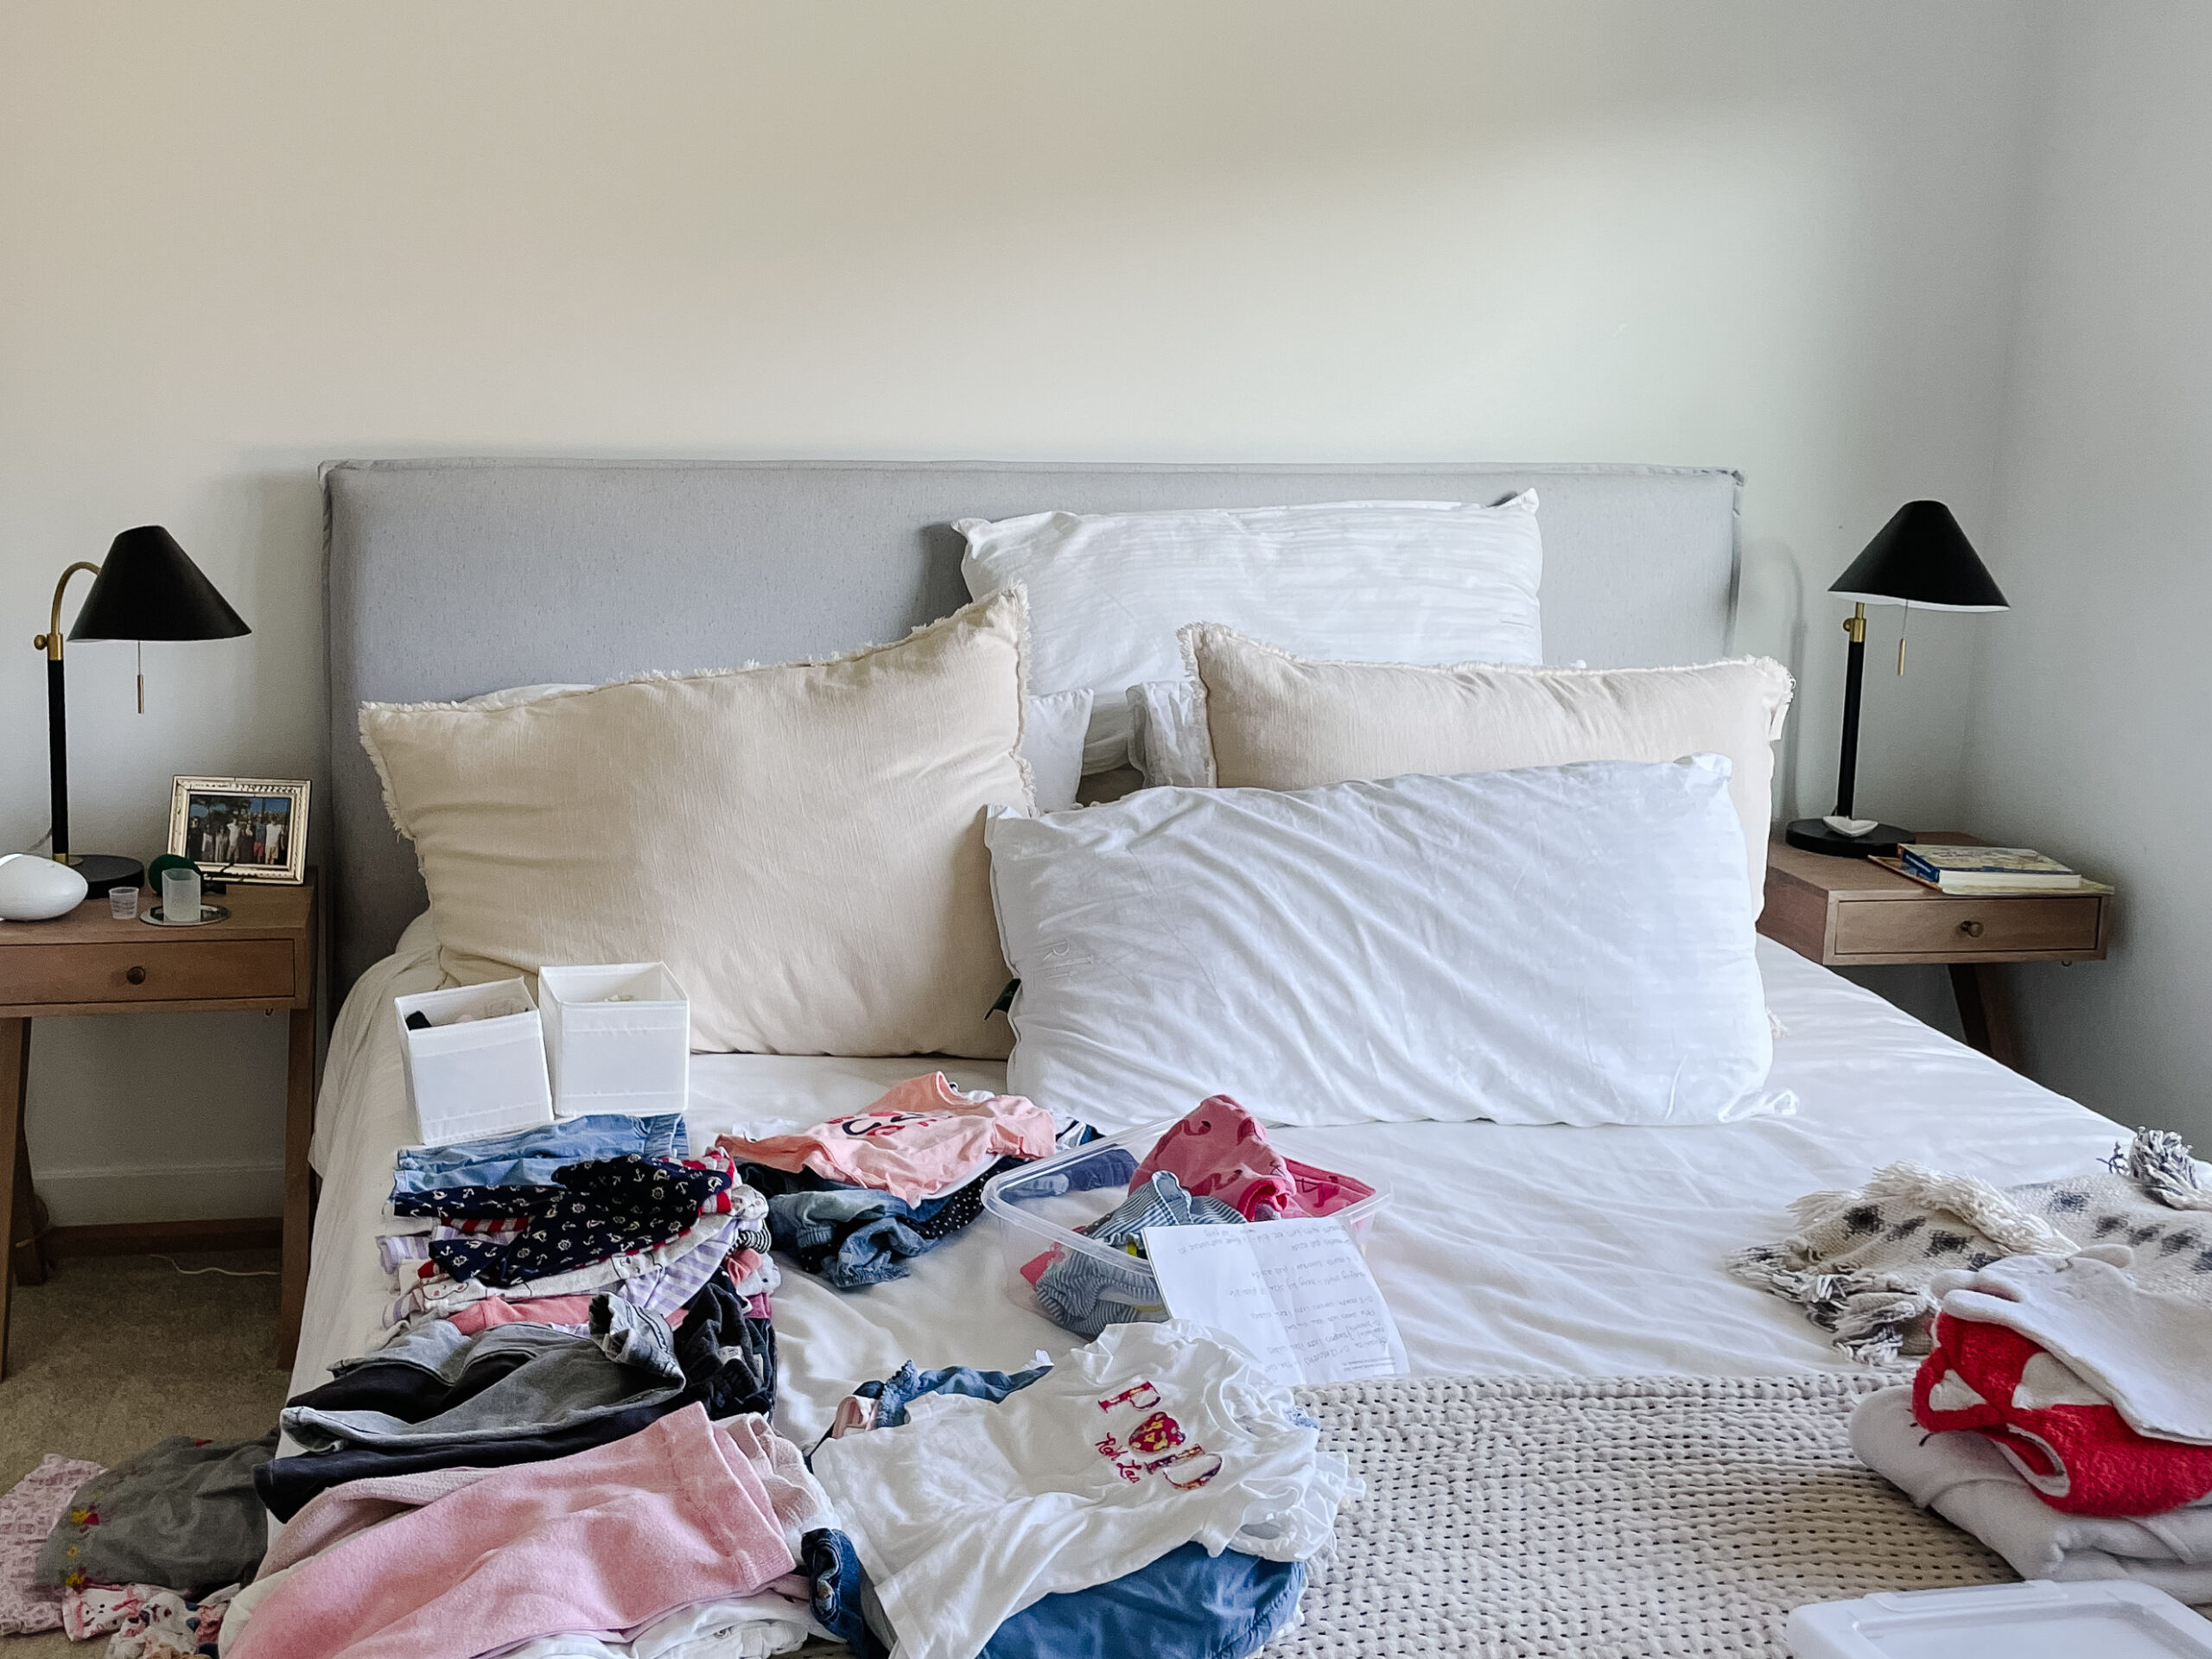 location of home office 2.0 - a picture of a bed with a bunch of kids clothes on it